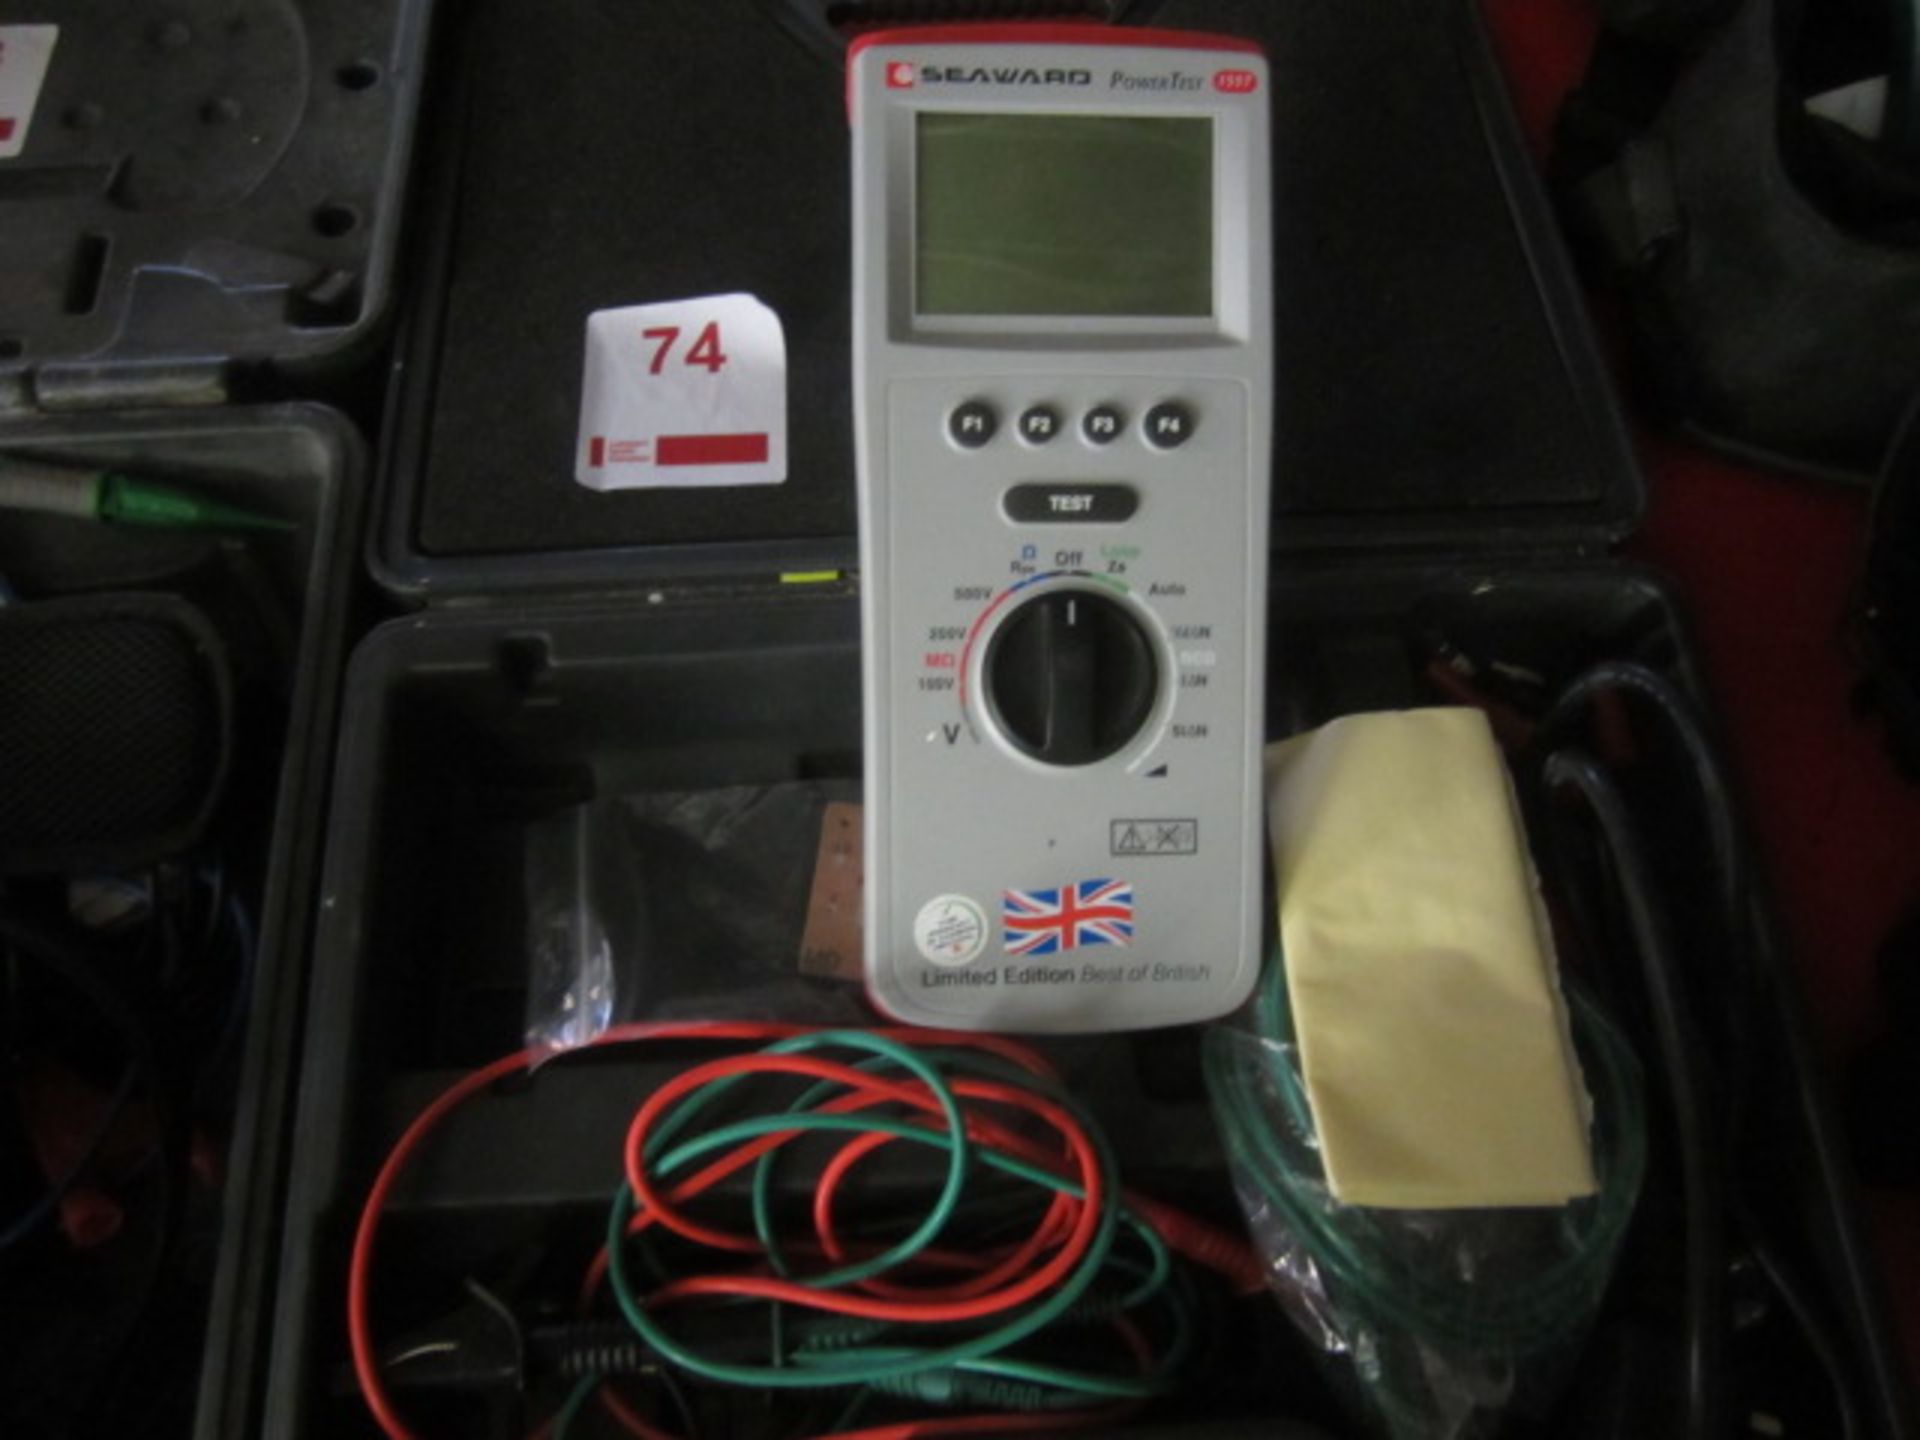 Seaward Powertest 1557 Mutli function installation tester with associated cables ** Located: